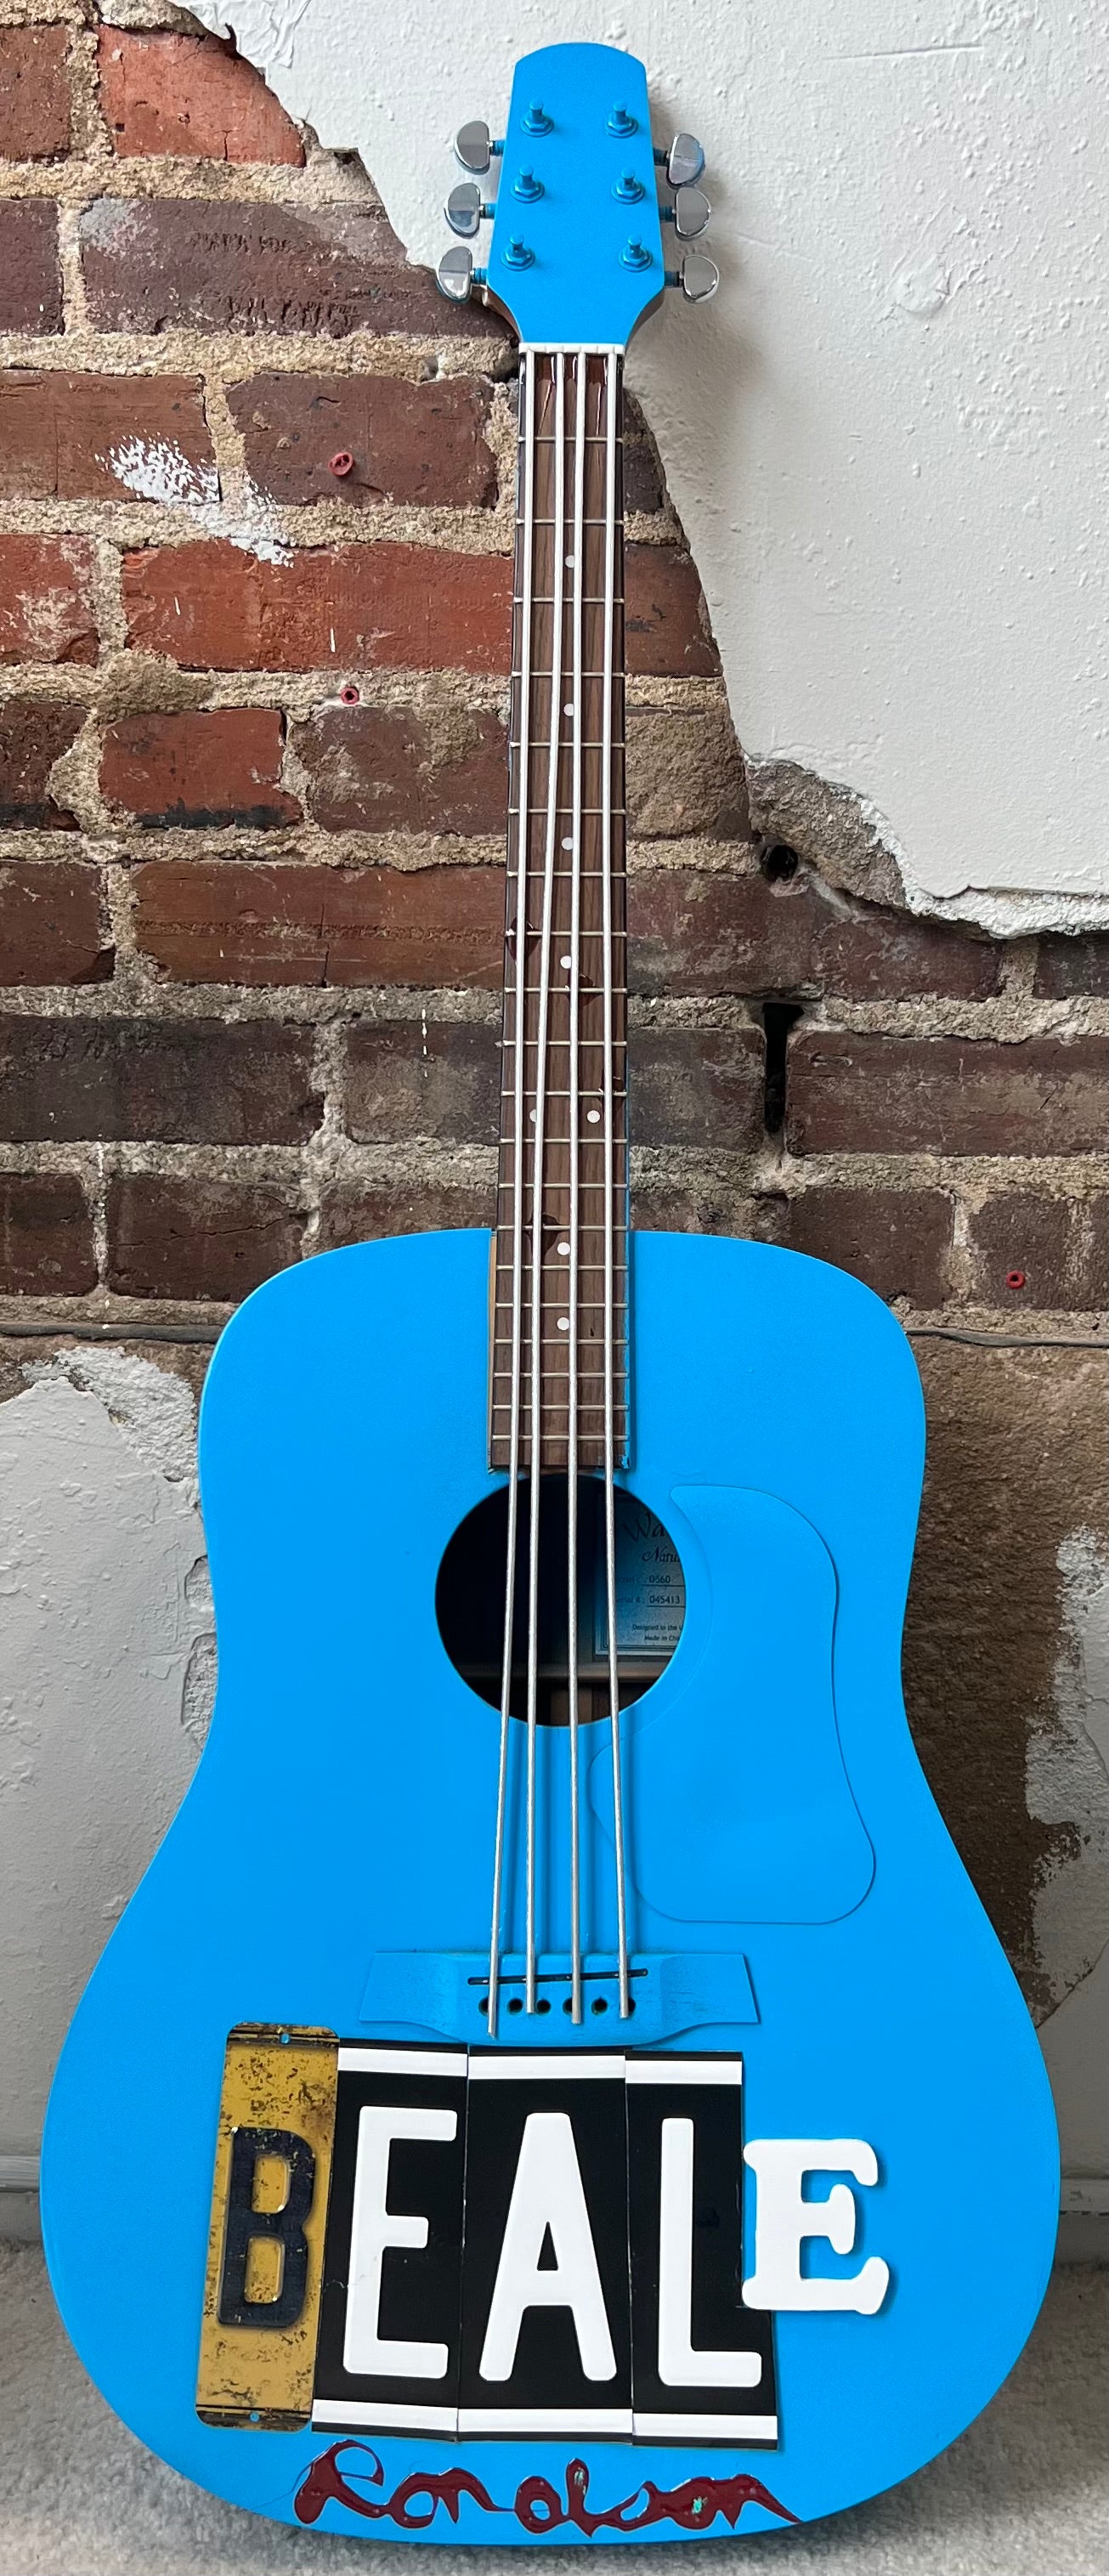 "Beale" The Blue Guitar by Ron Olson